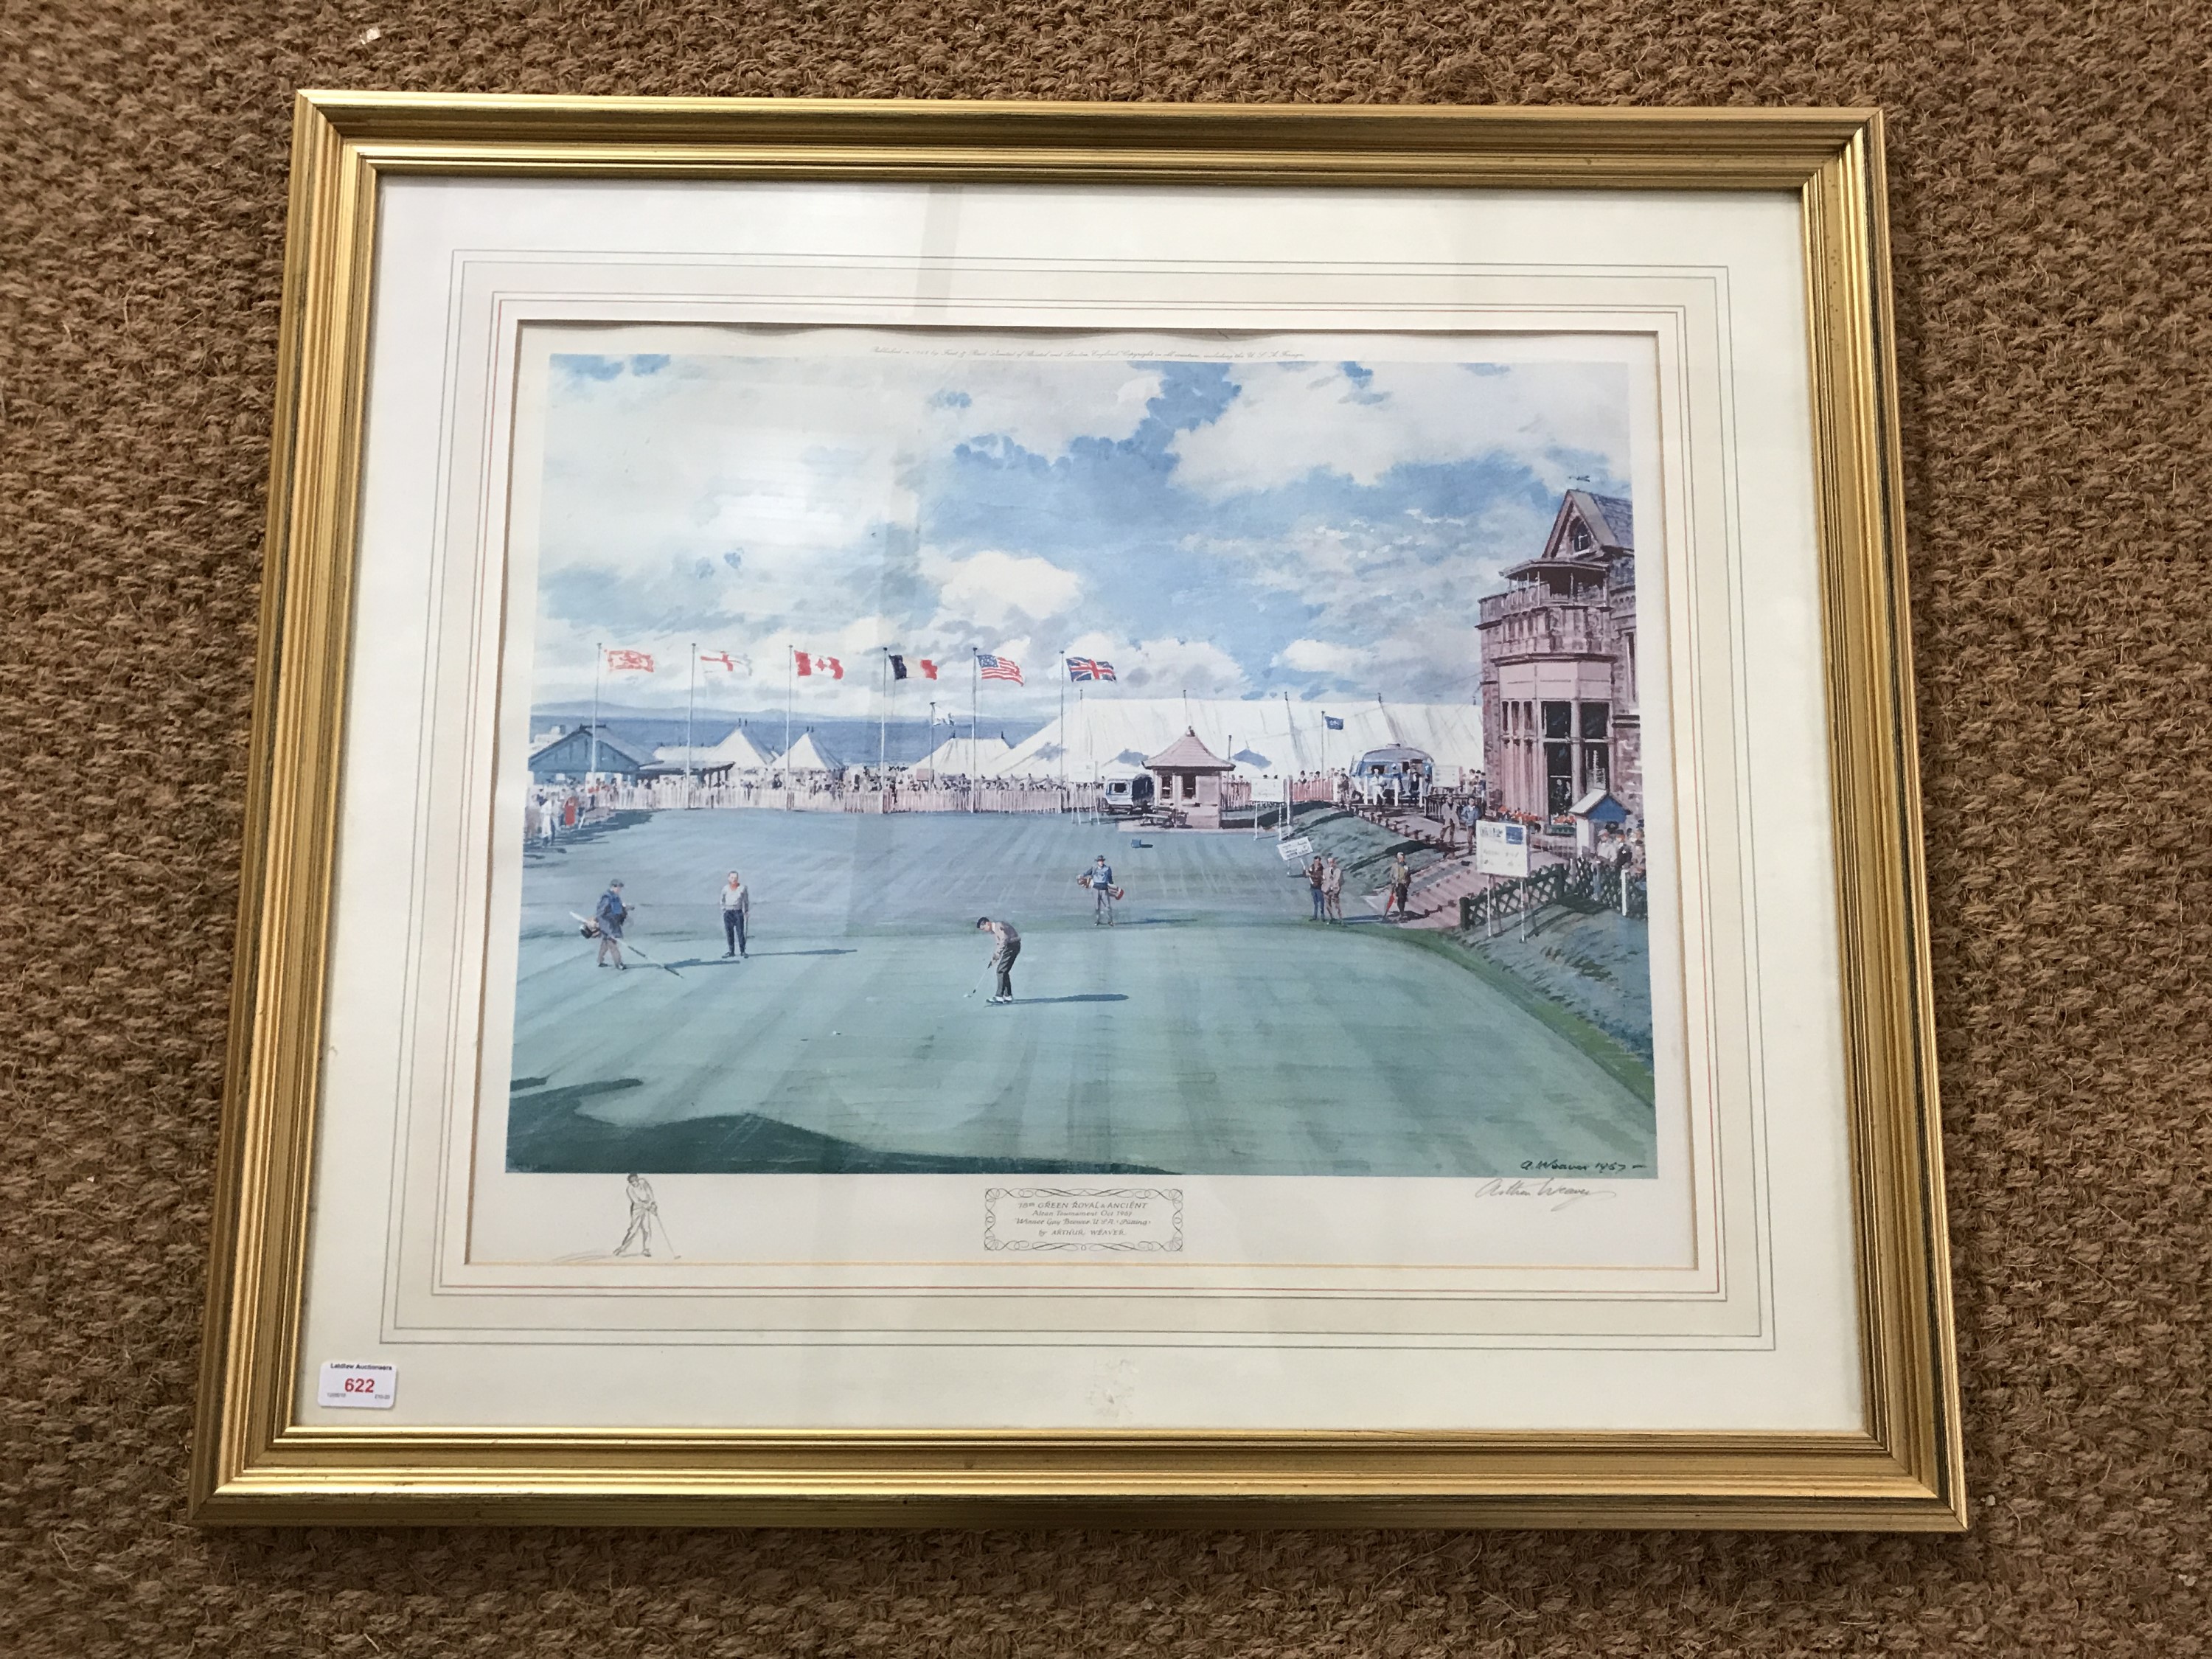 A large signed golf print by Arthur Weaver, "The 18th Green Royal and Ancient Alean tournament - Image 2 of 2